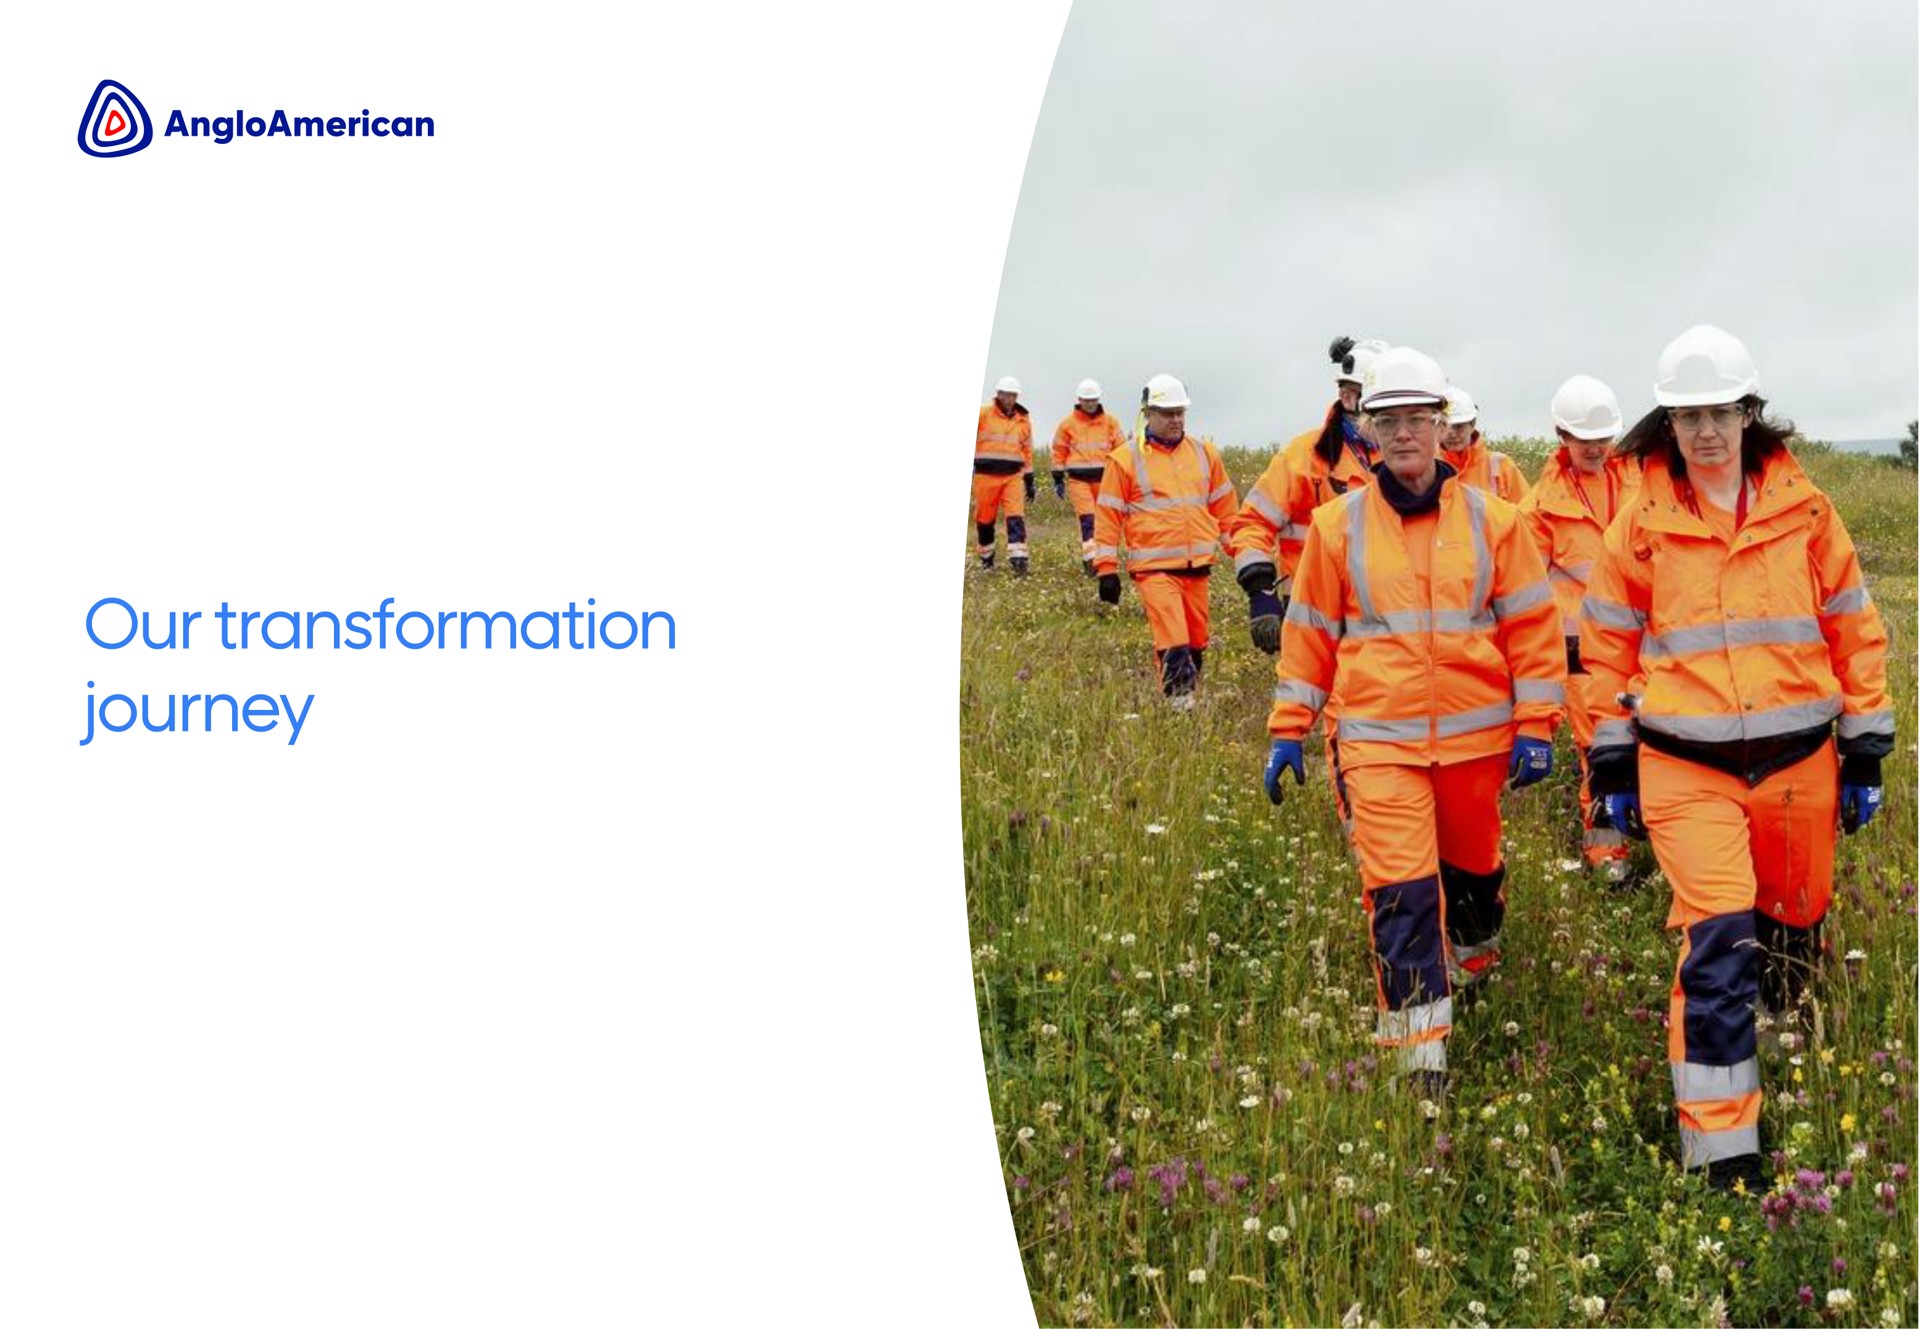 our transformation journey | AngloAmerican